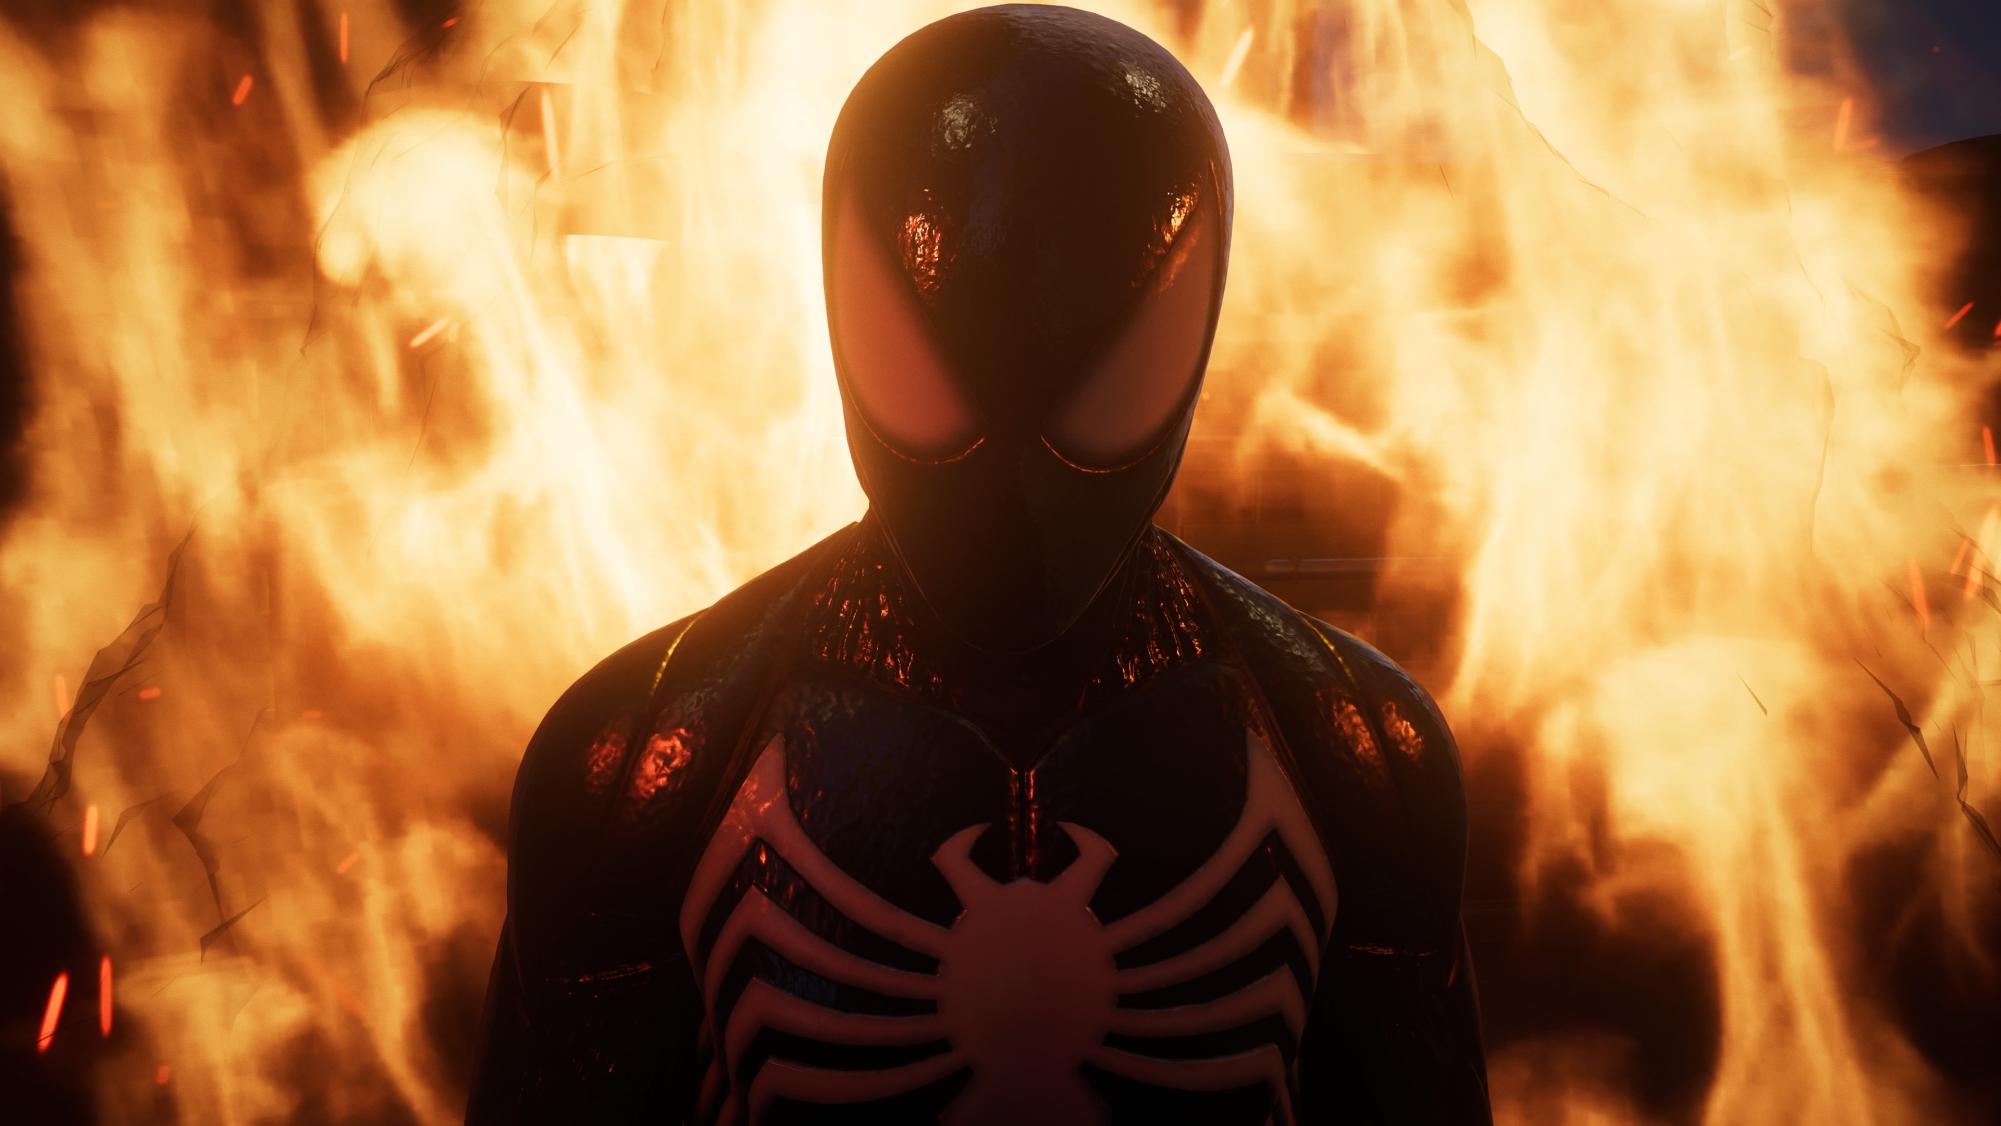 Marvel's Spider-Man 2 review: Webs, shadows, and a whole lot of heart